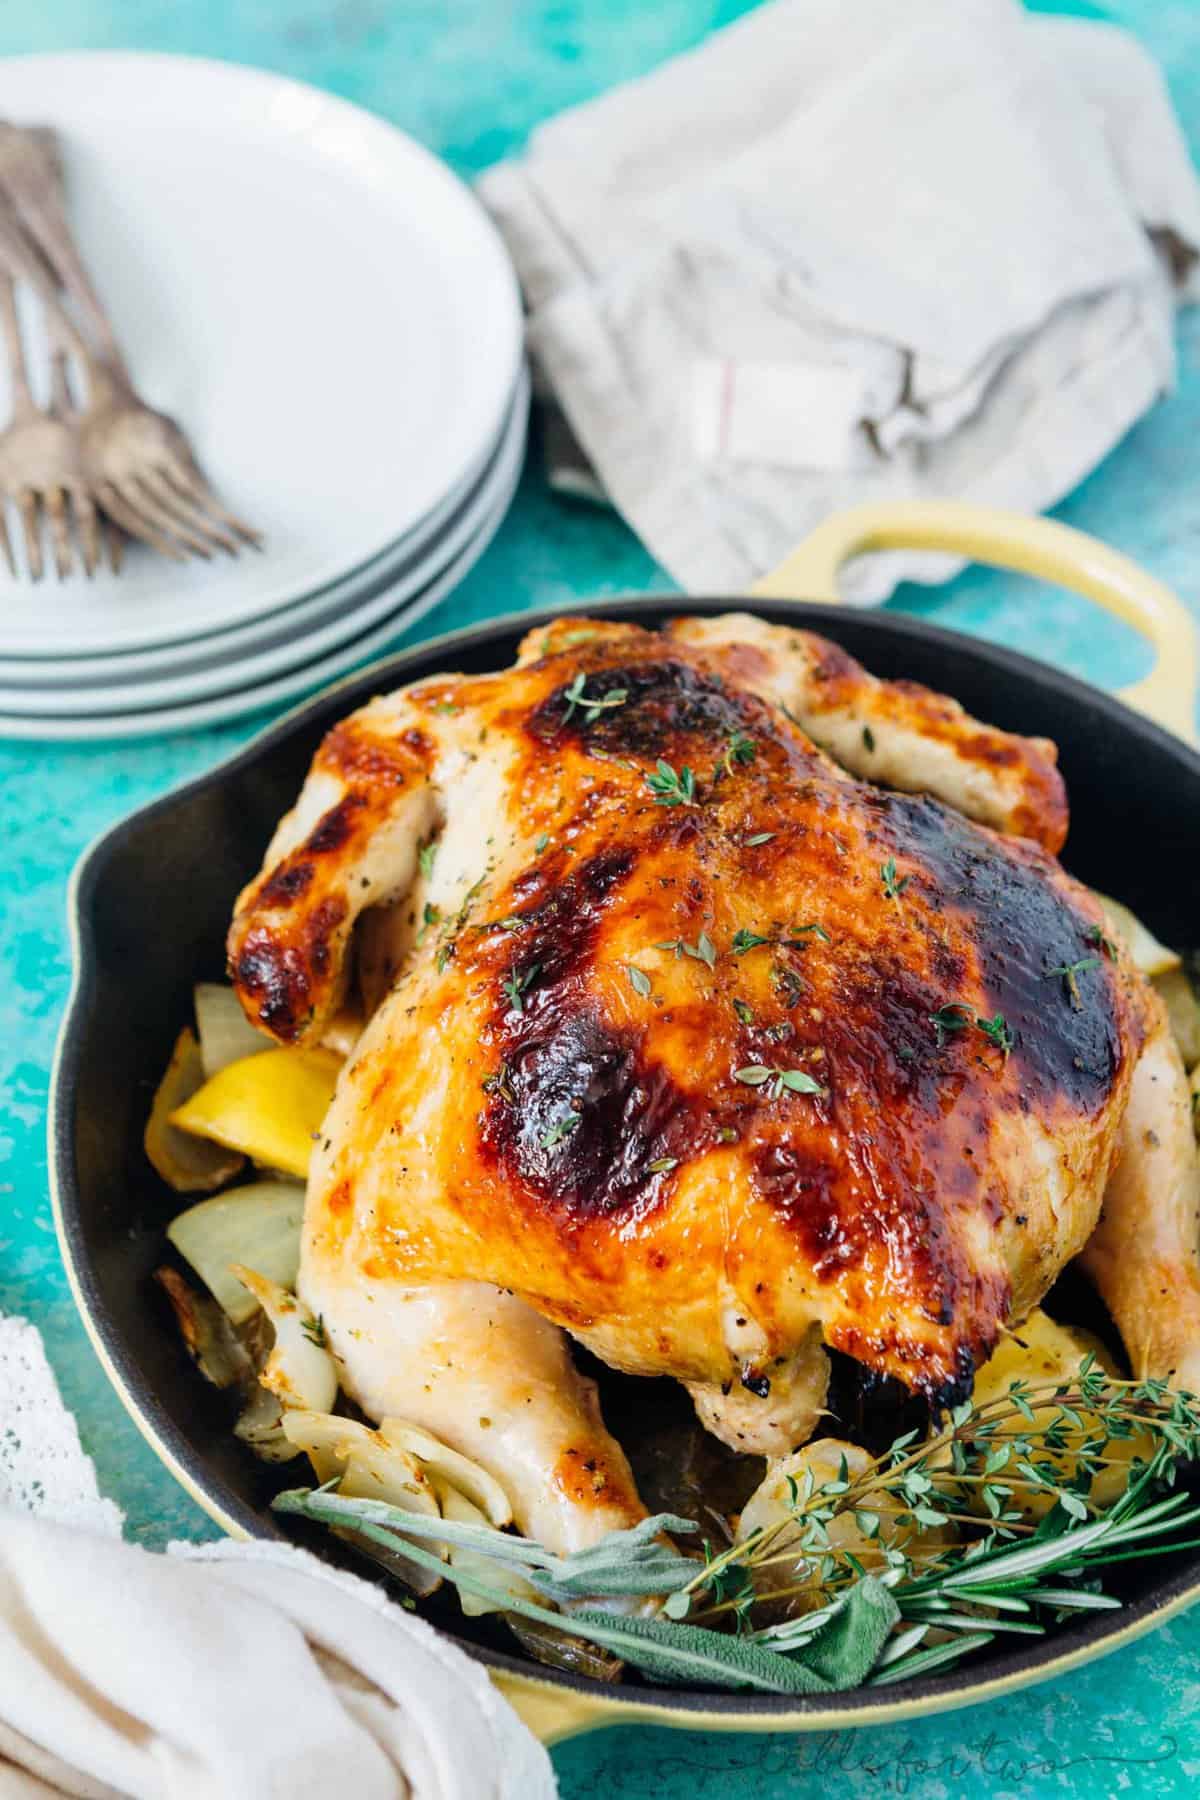 Pressure Cooker Honey Butter and Herb Roasted Chicken - Instant Pot